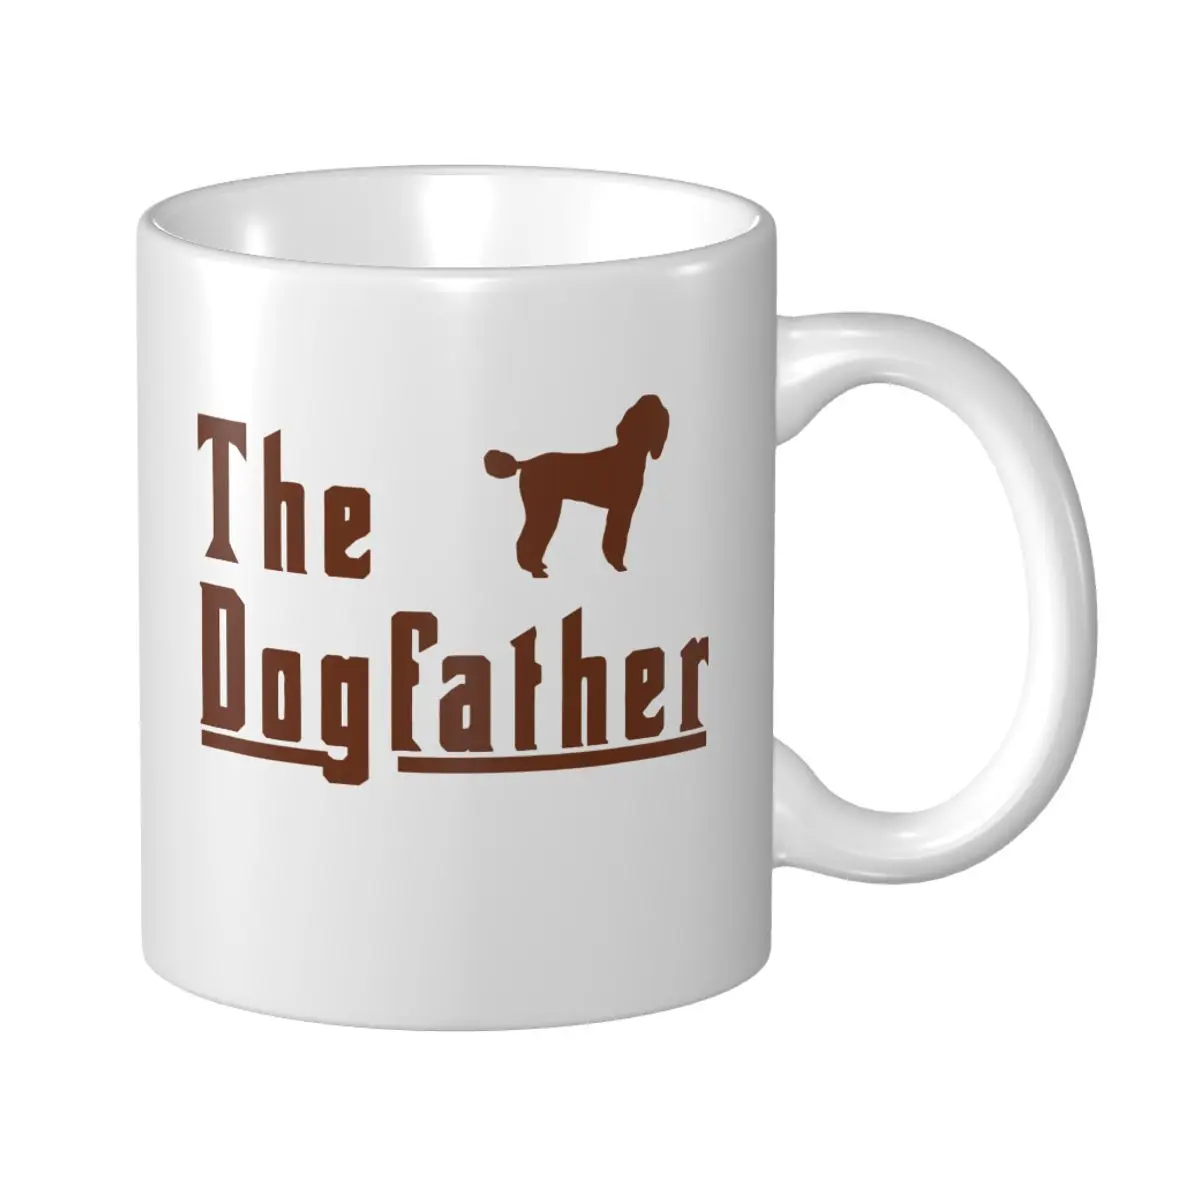 

Mark Cup Mug Mens The Dogfather Poodle Dog Christmas Coffee Mugs Tea Milk Water Cup Travel Mugs For Office Home